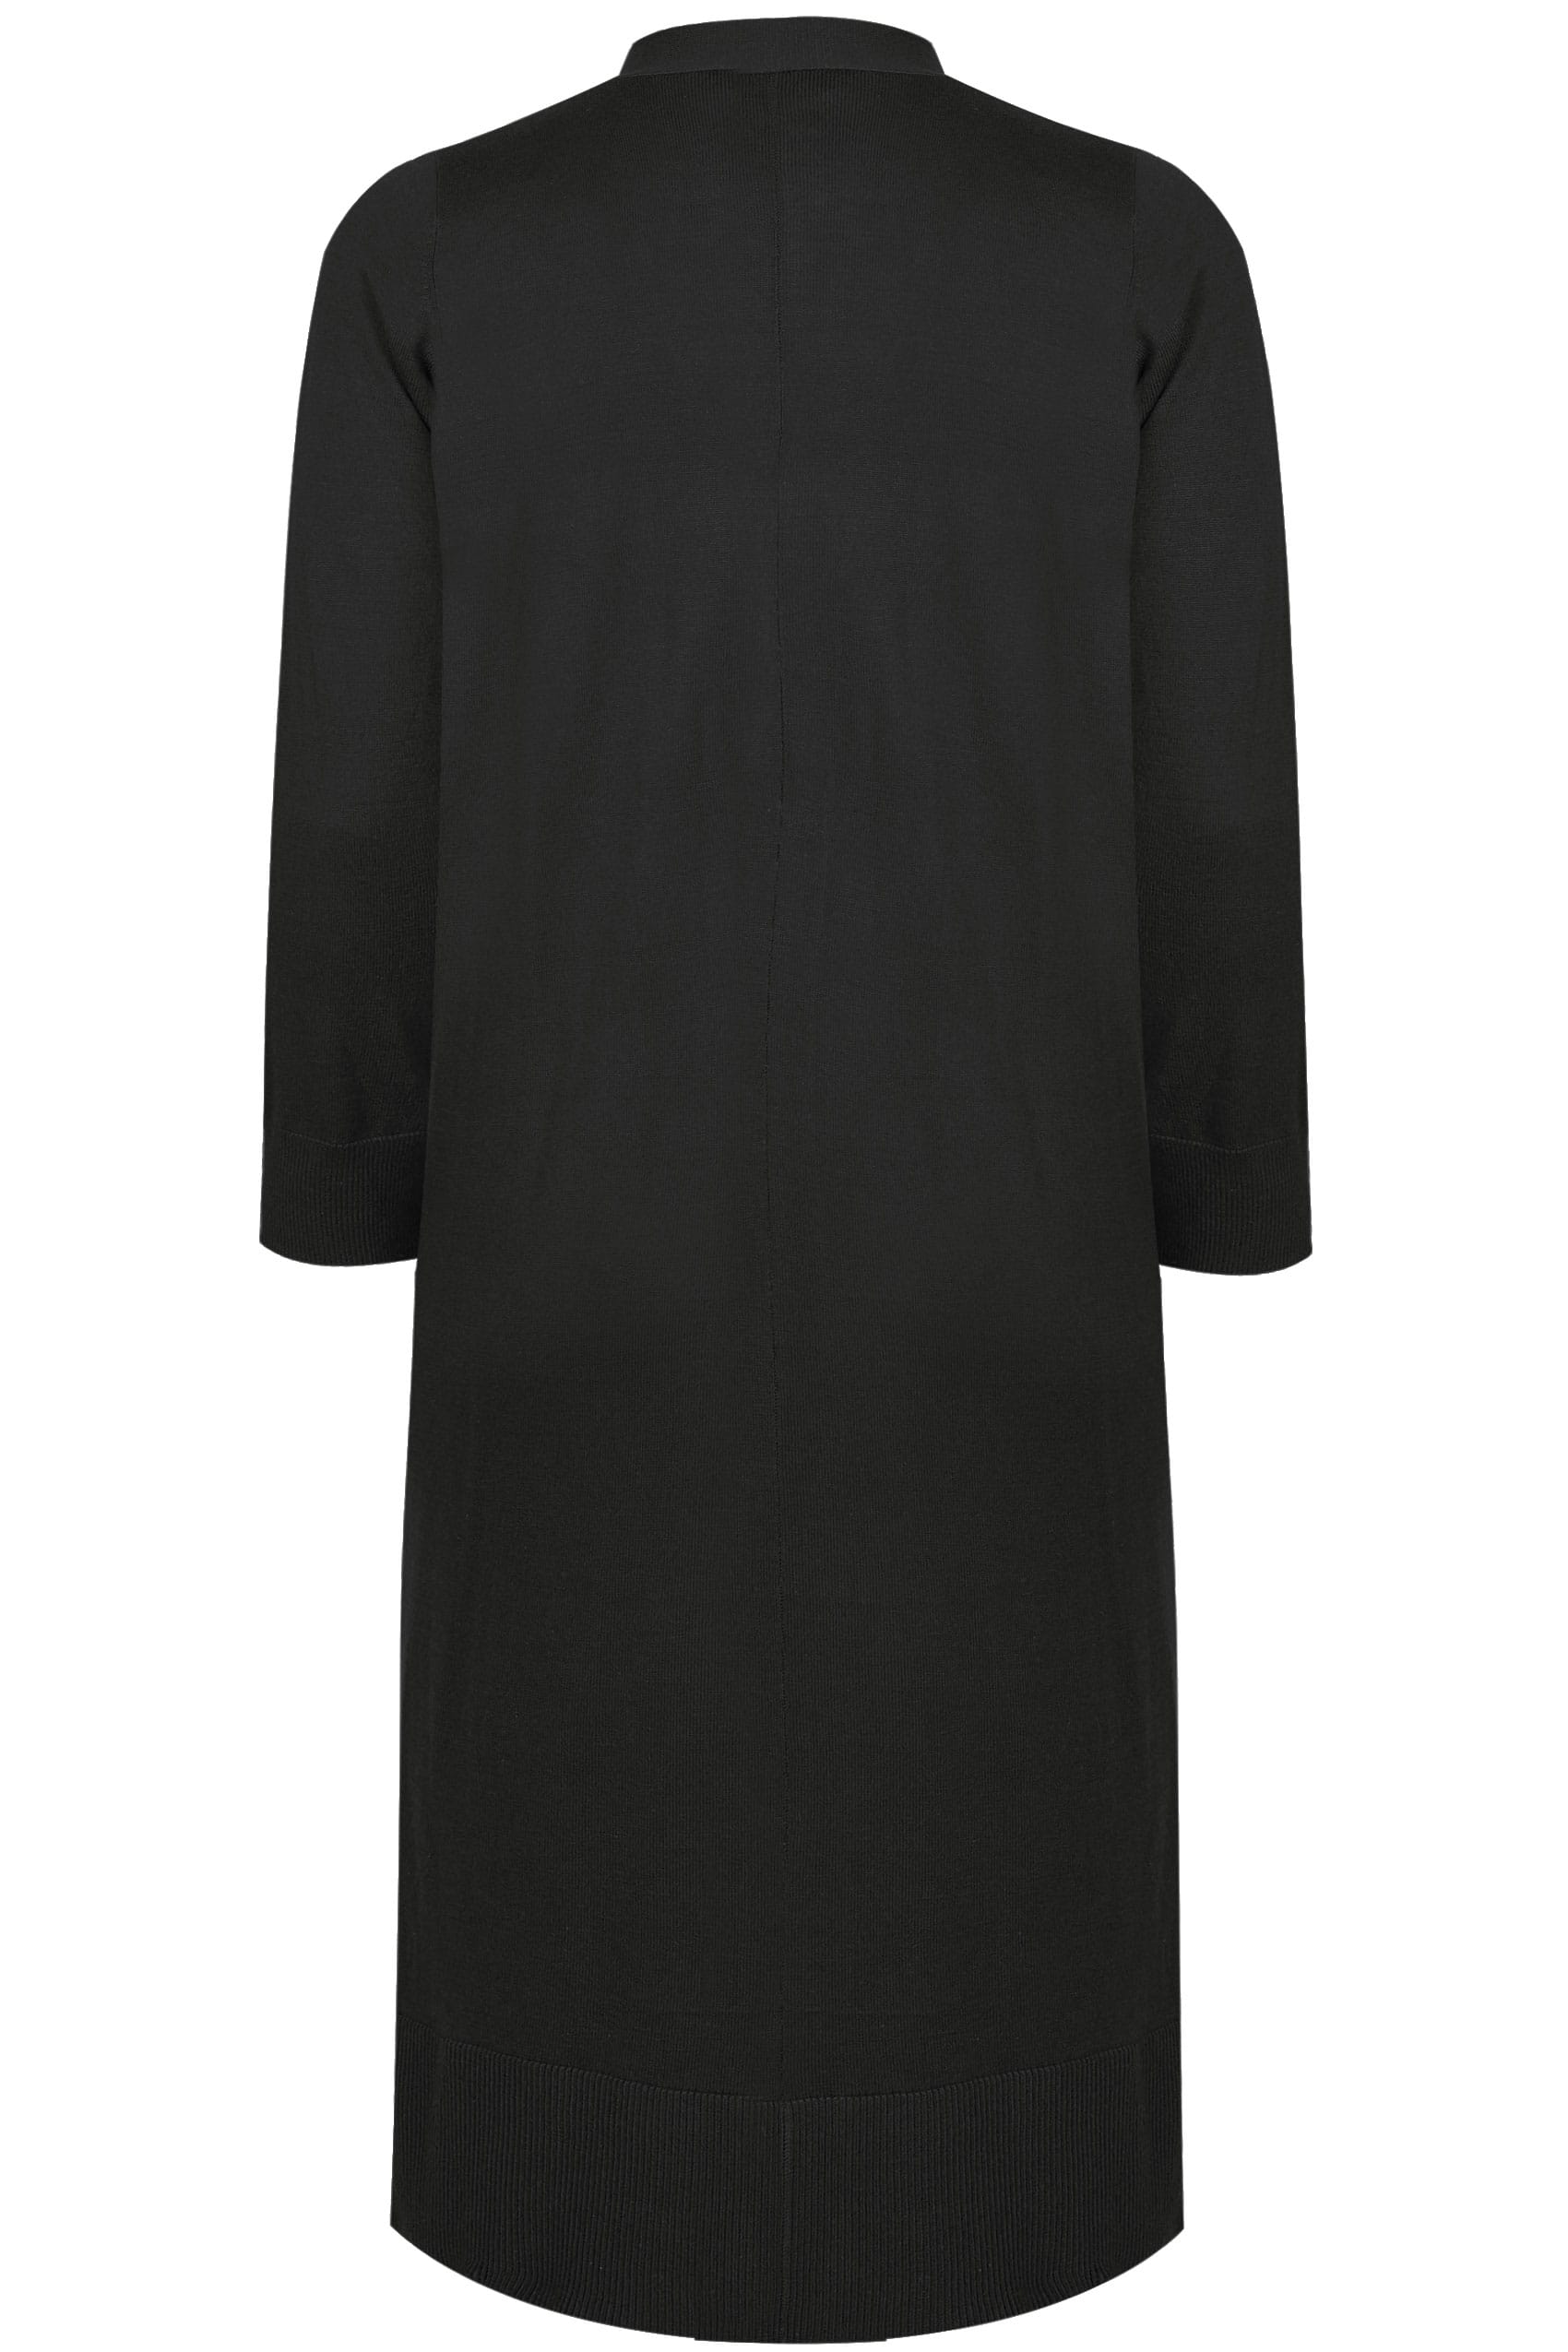 Black Longline Cardigan With Side Splits, plus size 16 to 36 | Yours ...